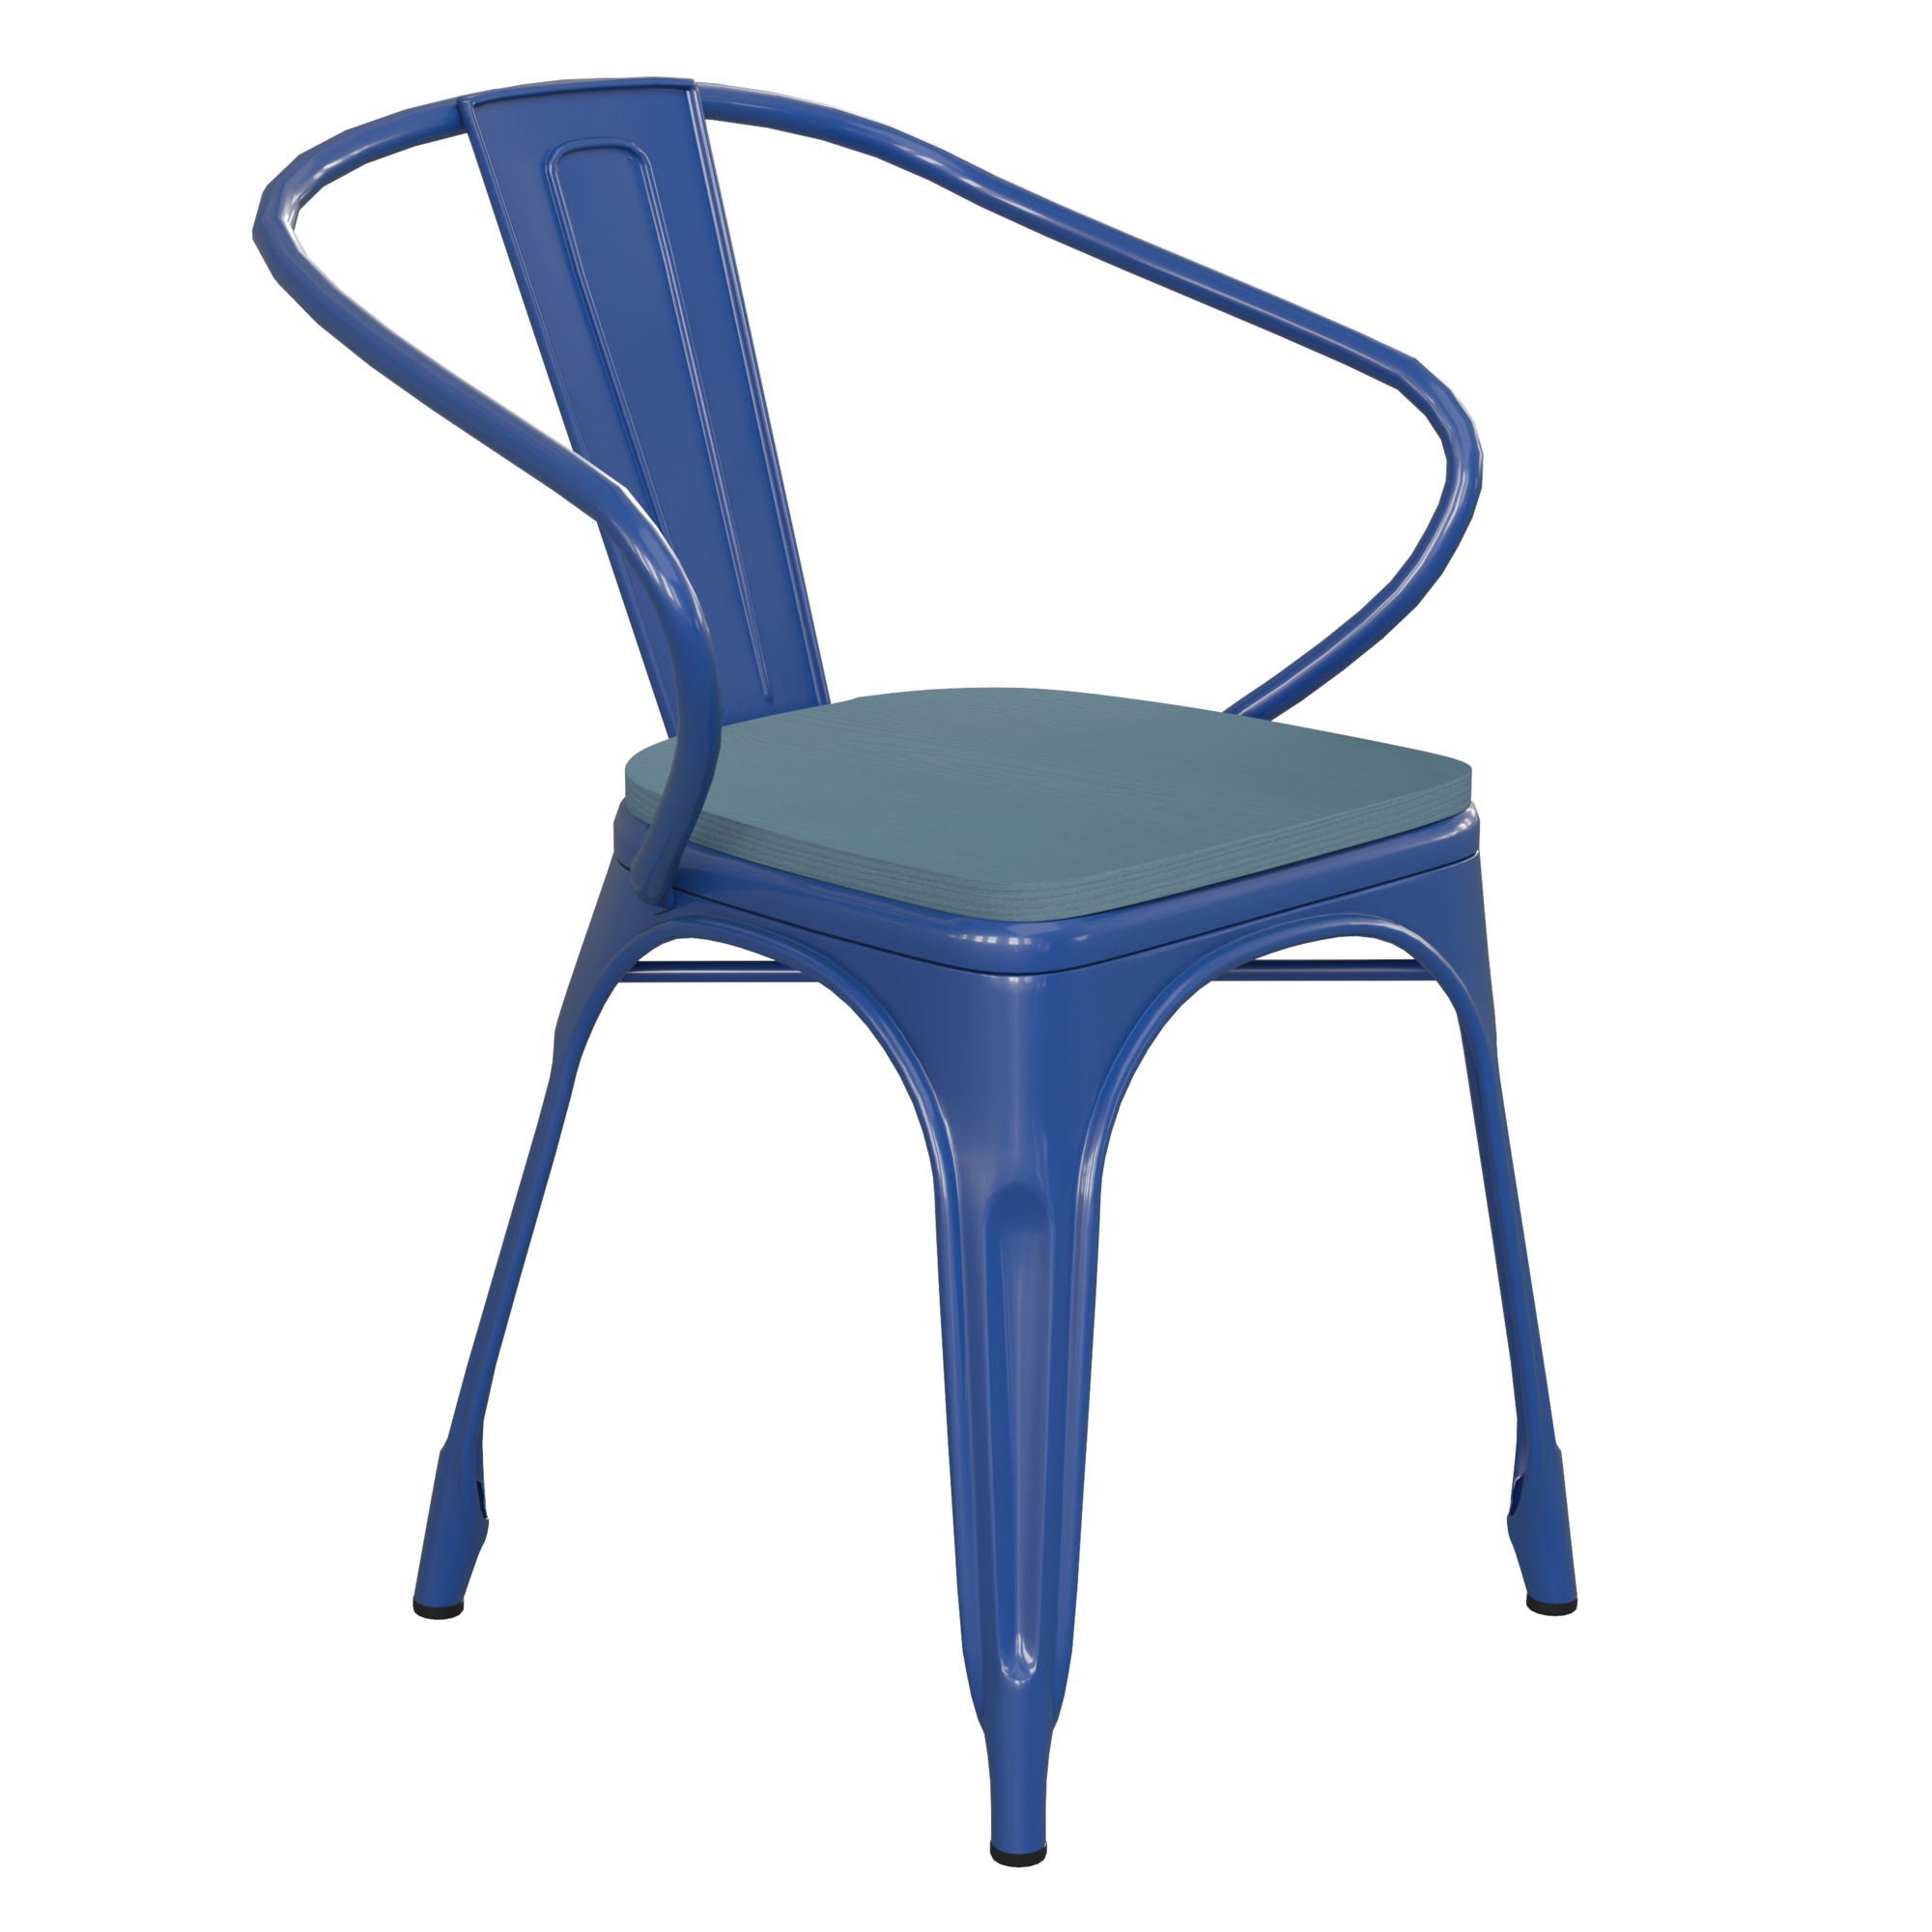 Flash Furniture, Blue Metal Stack Chair - Teal Blue Poly Resin Seat, Primary Color Blue, Included (qty.) 1, Model CH31270BLPL1C